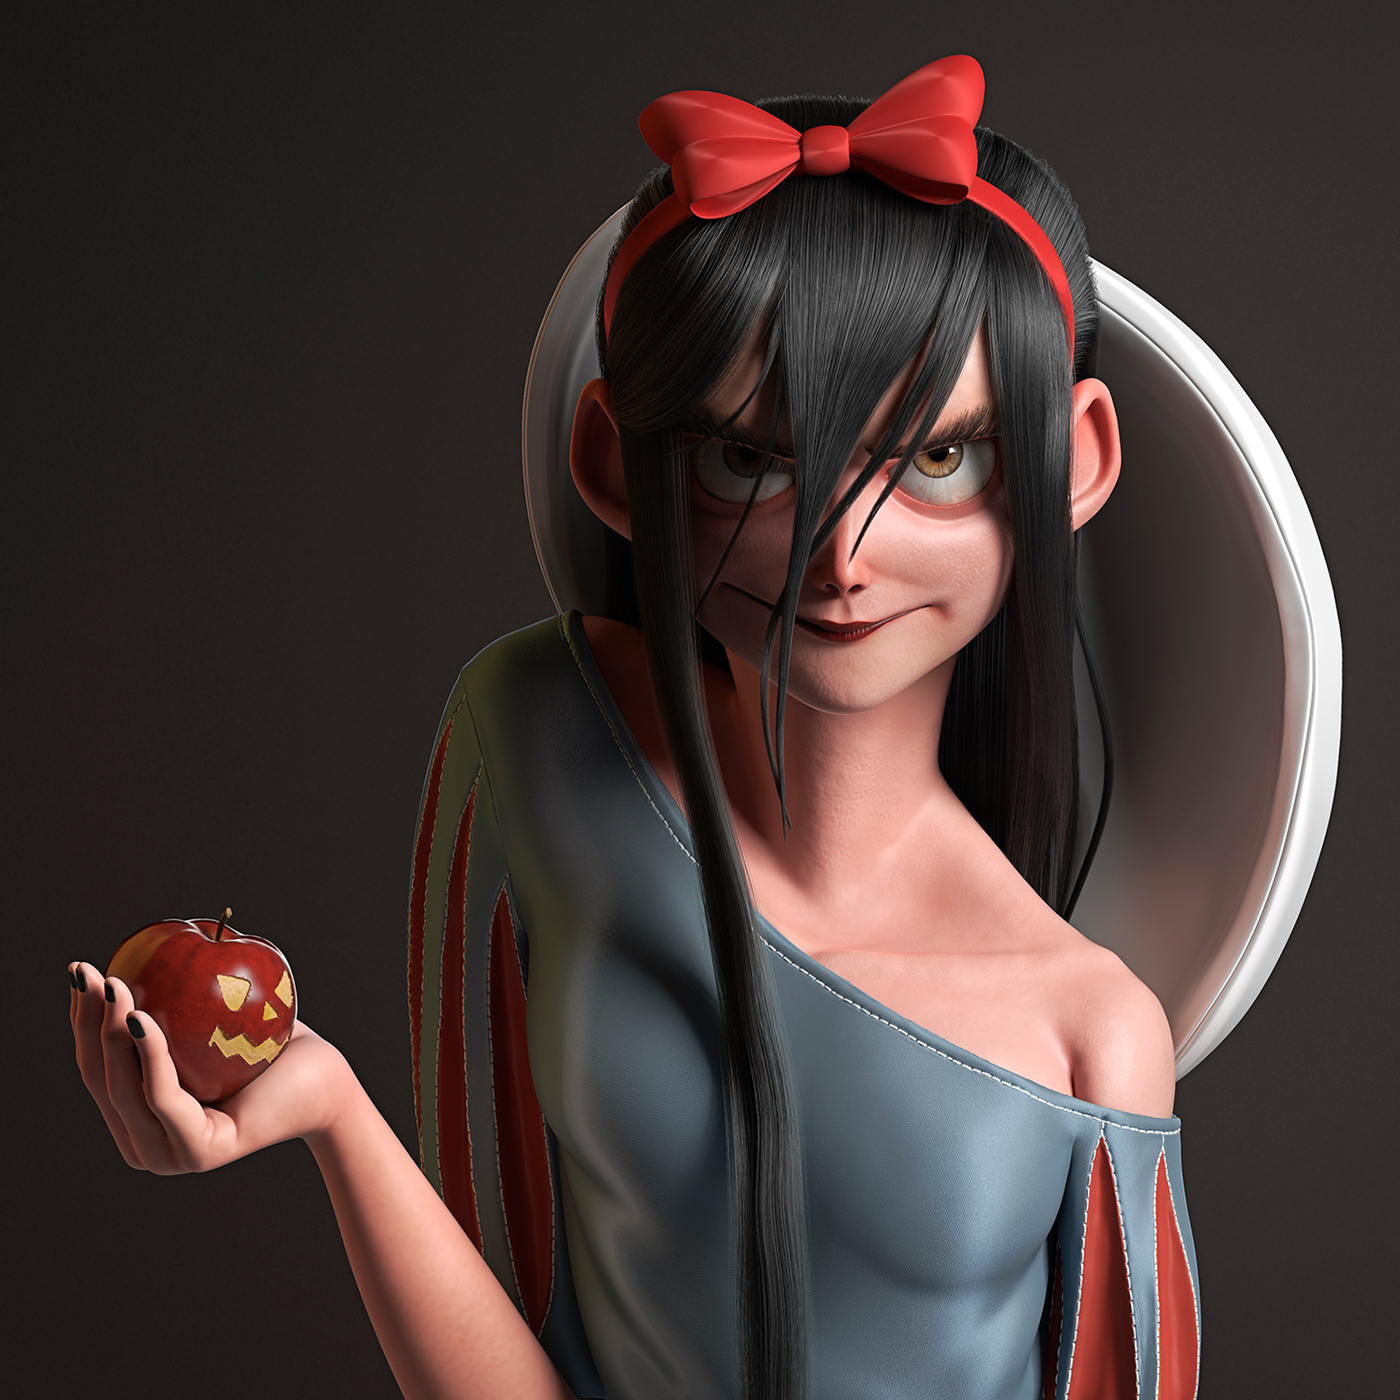 3dsmax 3D vray Zbrush snow white Halloween Hair and Fur Character